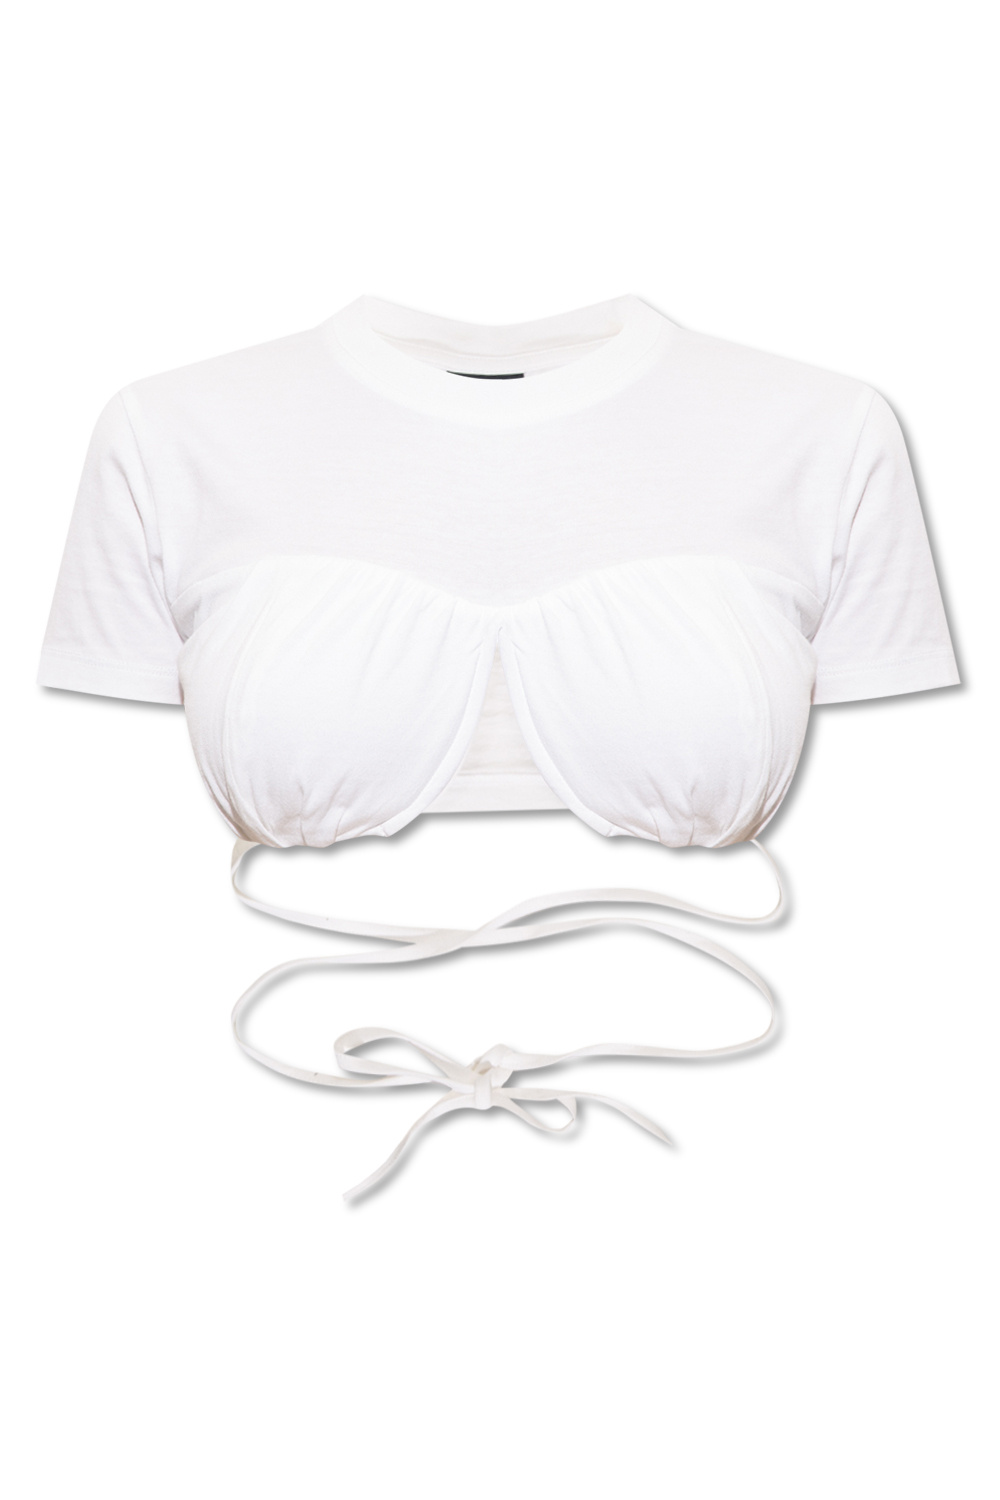 Jacquemus ‘Baci’ crop top with underwires